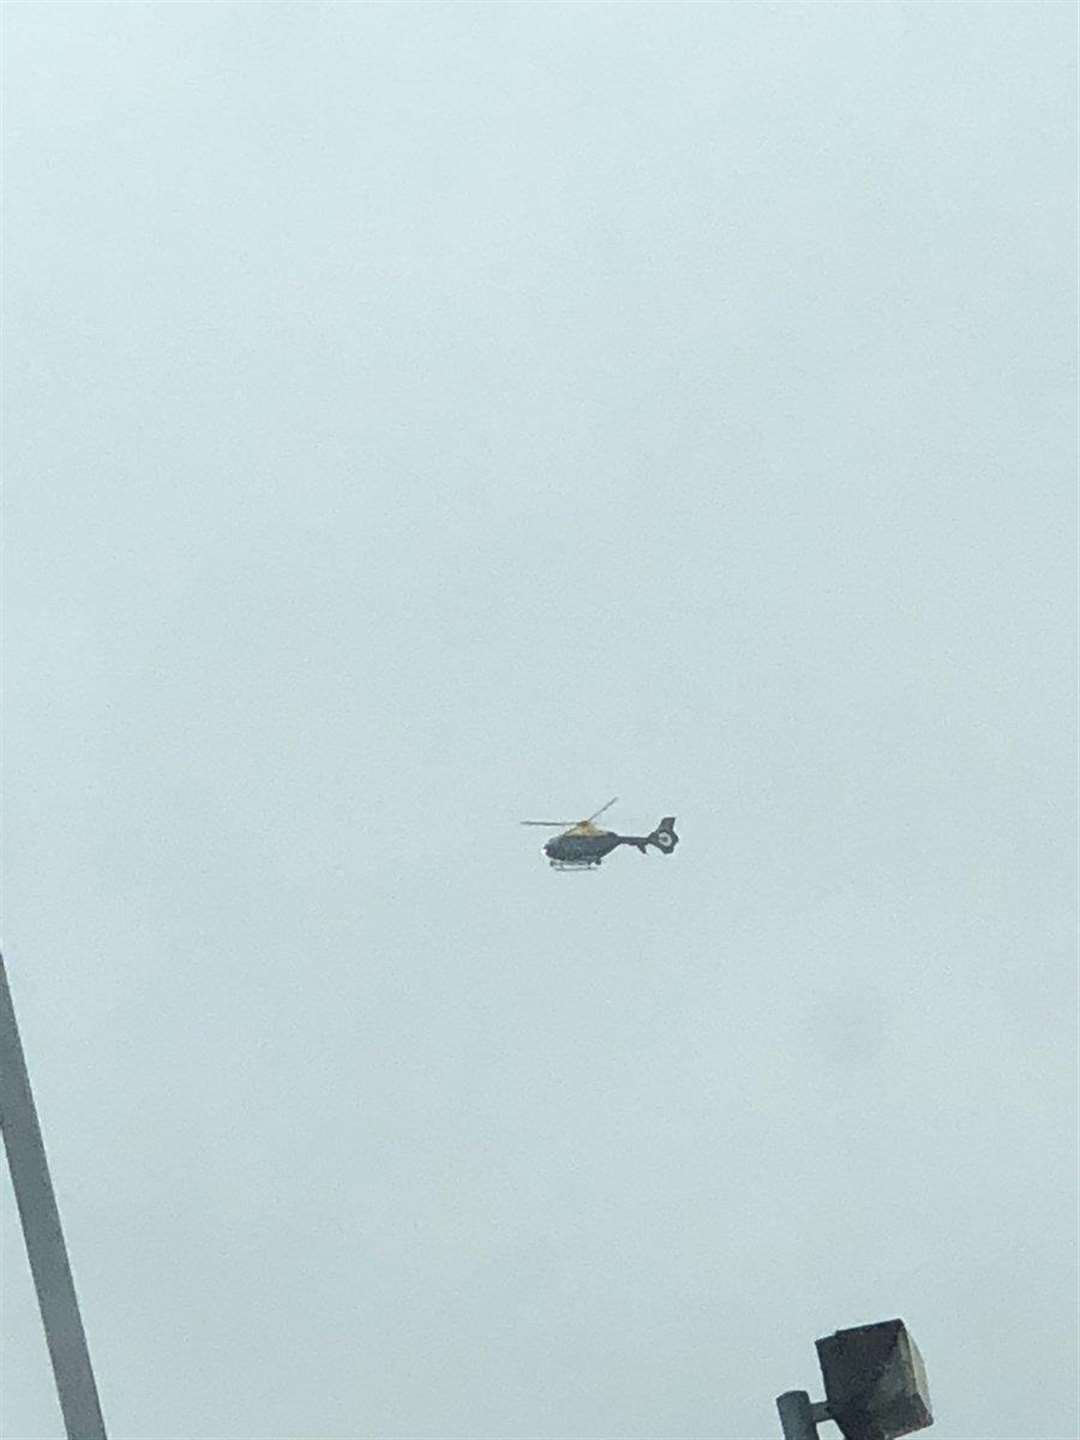 The police helicopter spotted in Sittingbourne. Photo: @its_joshy16 (1658868)